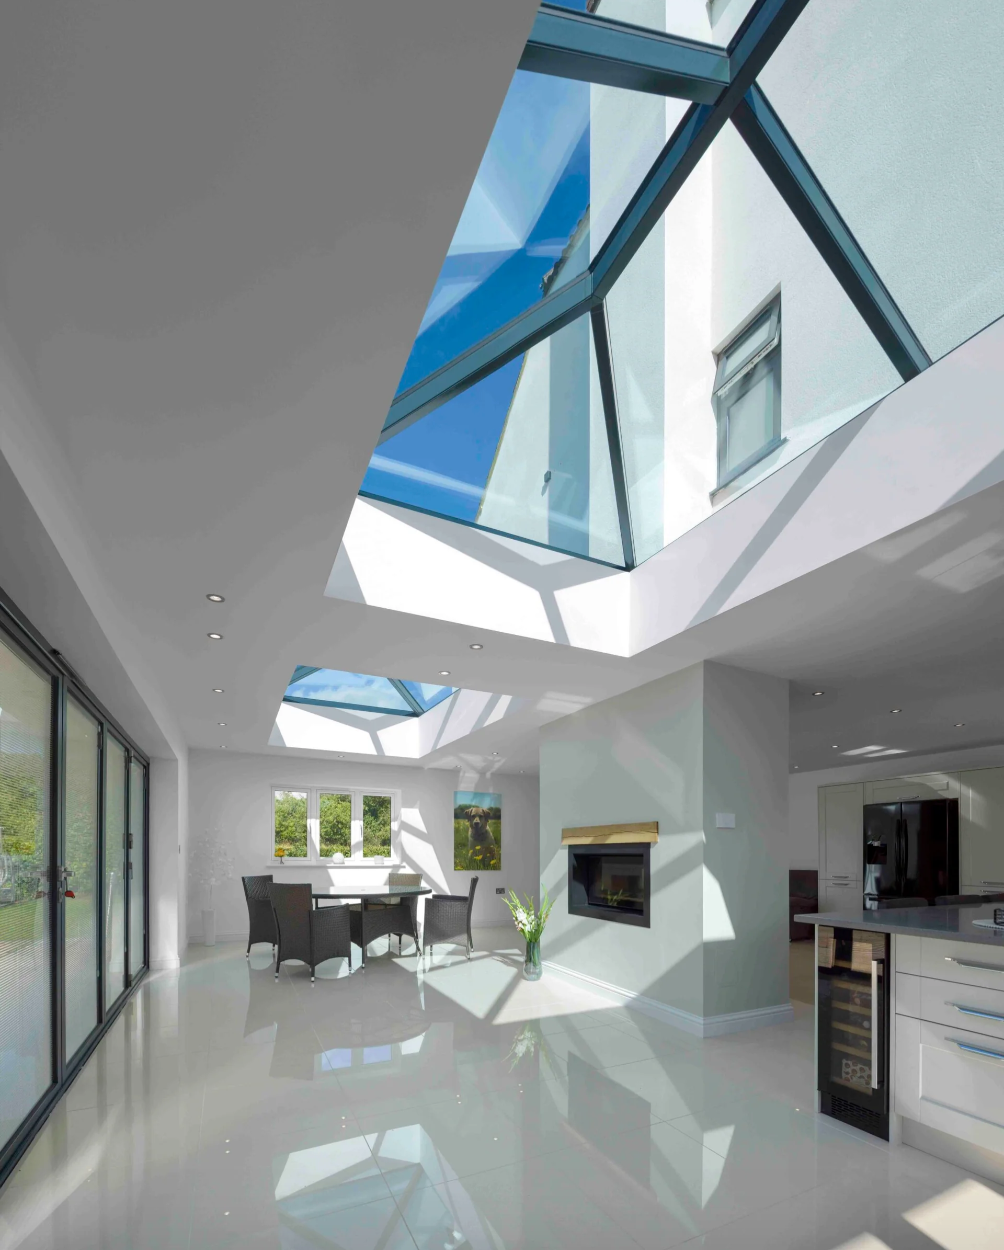 Shedding Light on Home Improvement: Exploring Common Rooflight Sizes and Options